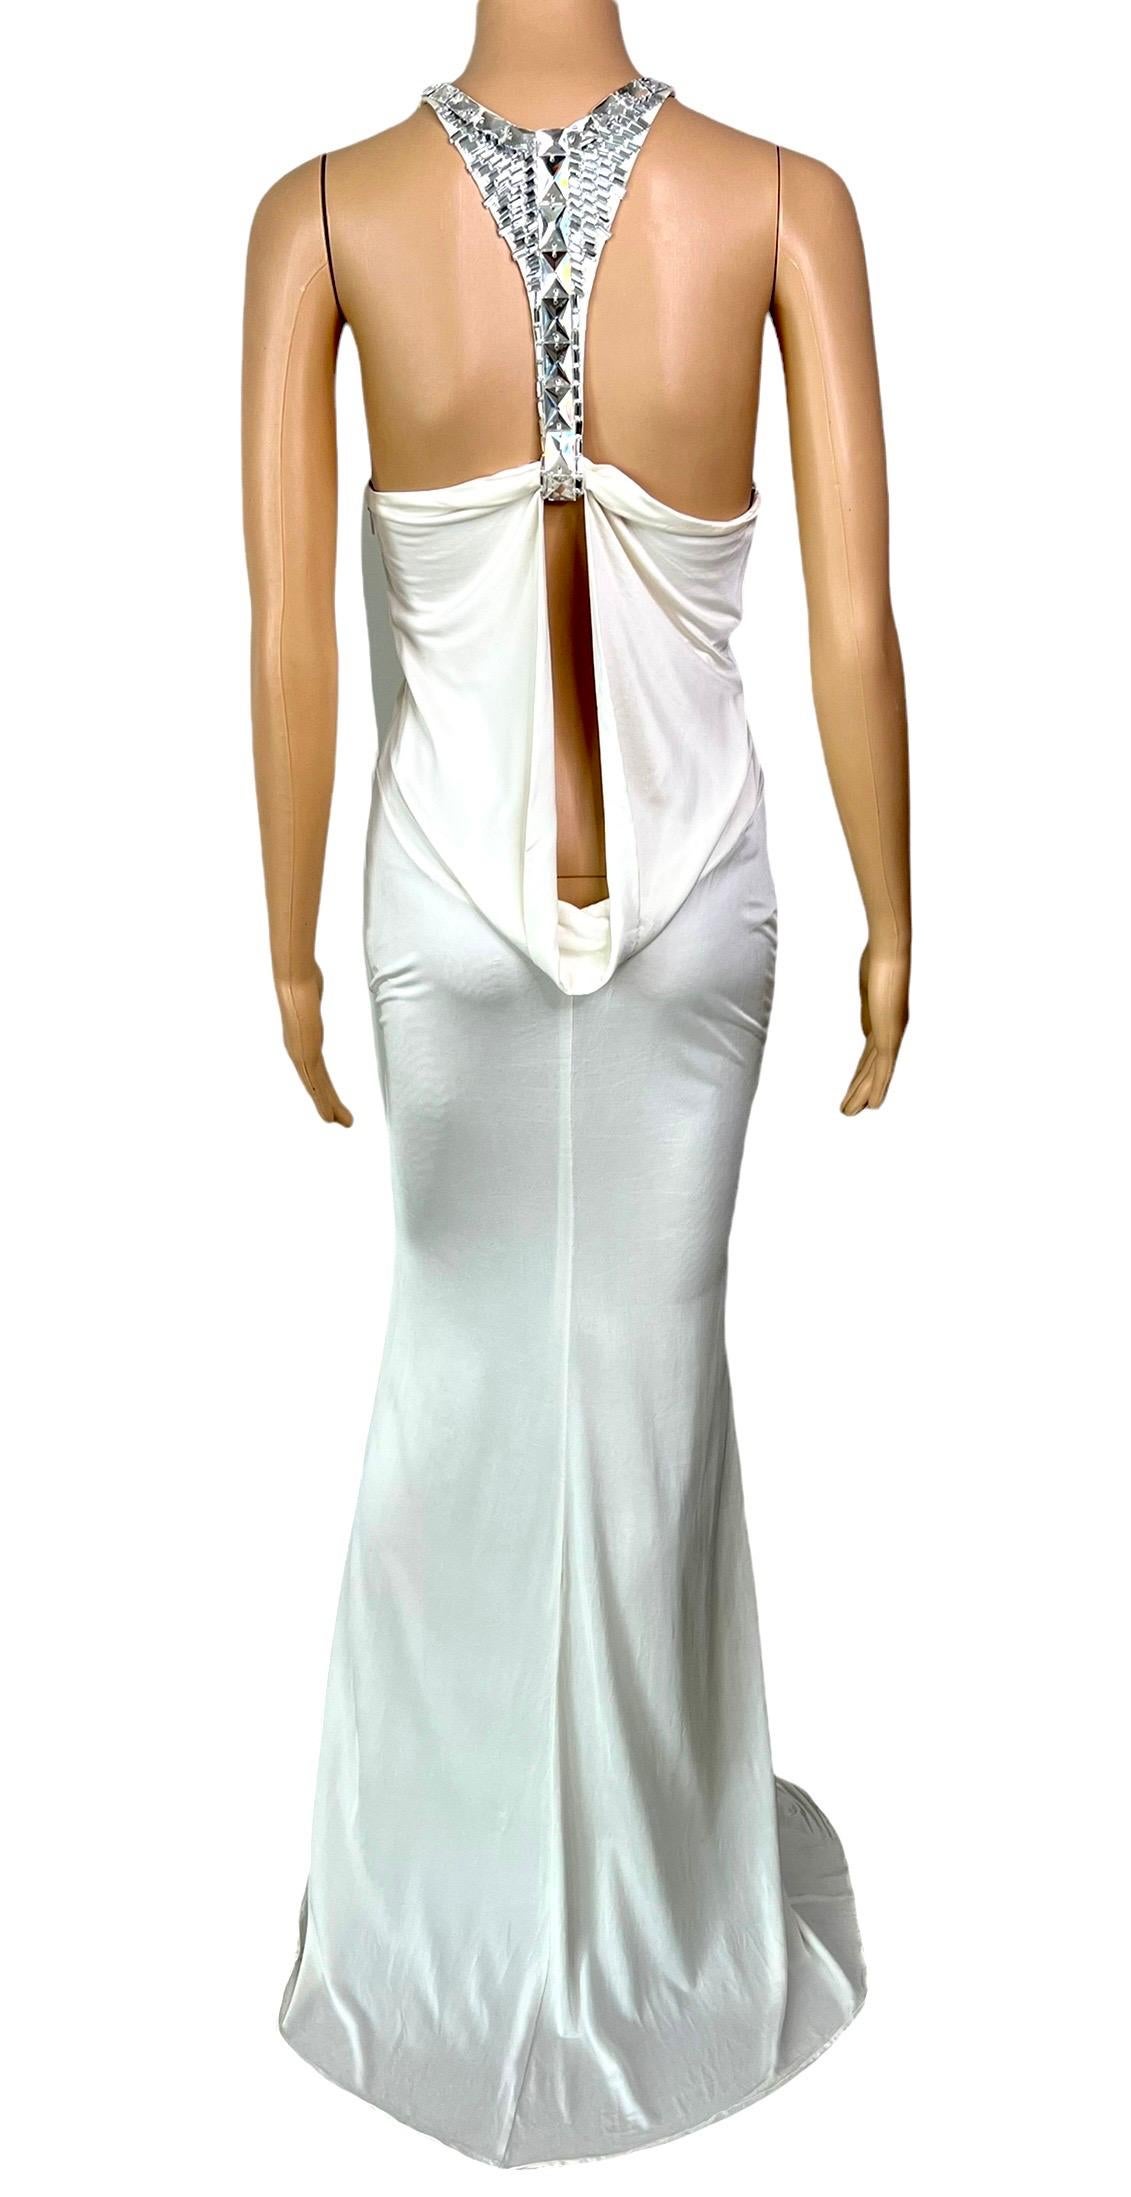 Tom Ford for Gucci F/W 2004 Embellished Plunging Cutout Ivory Evening Dress Gown For Sale 1